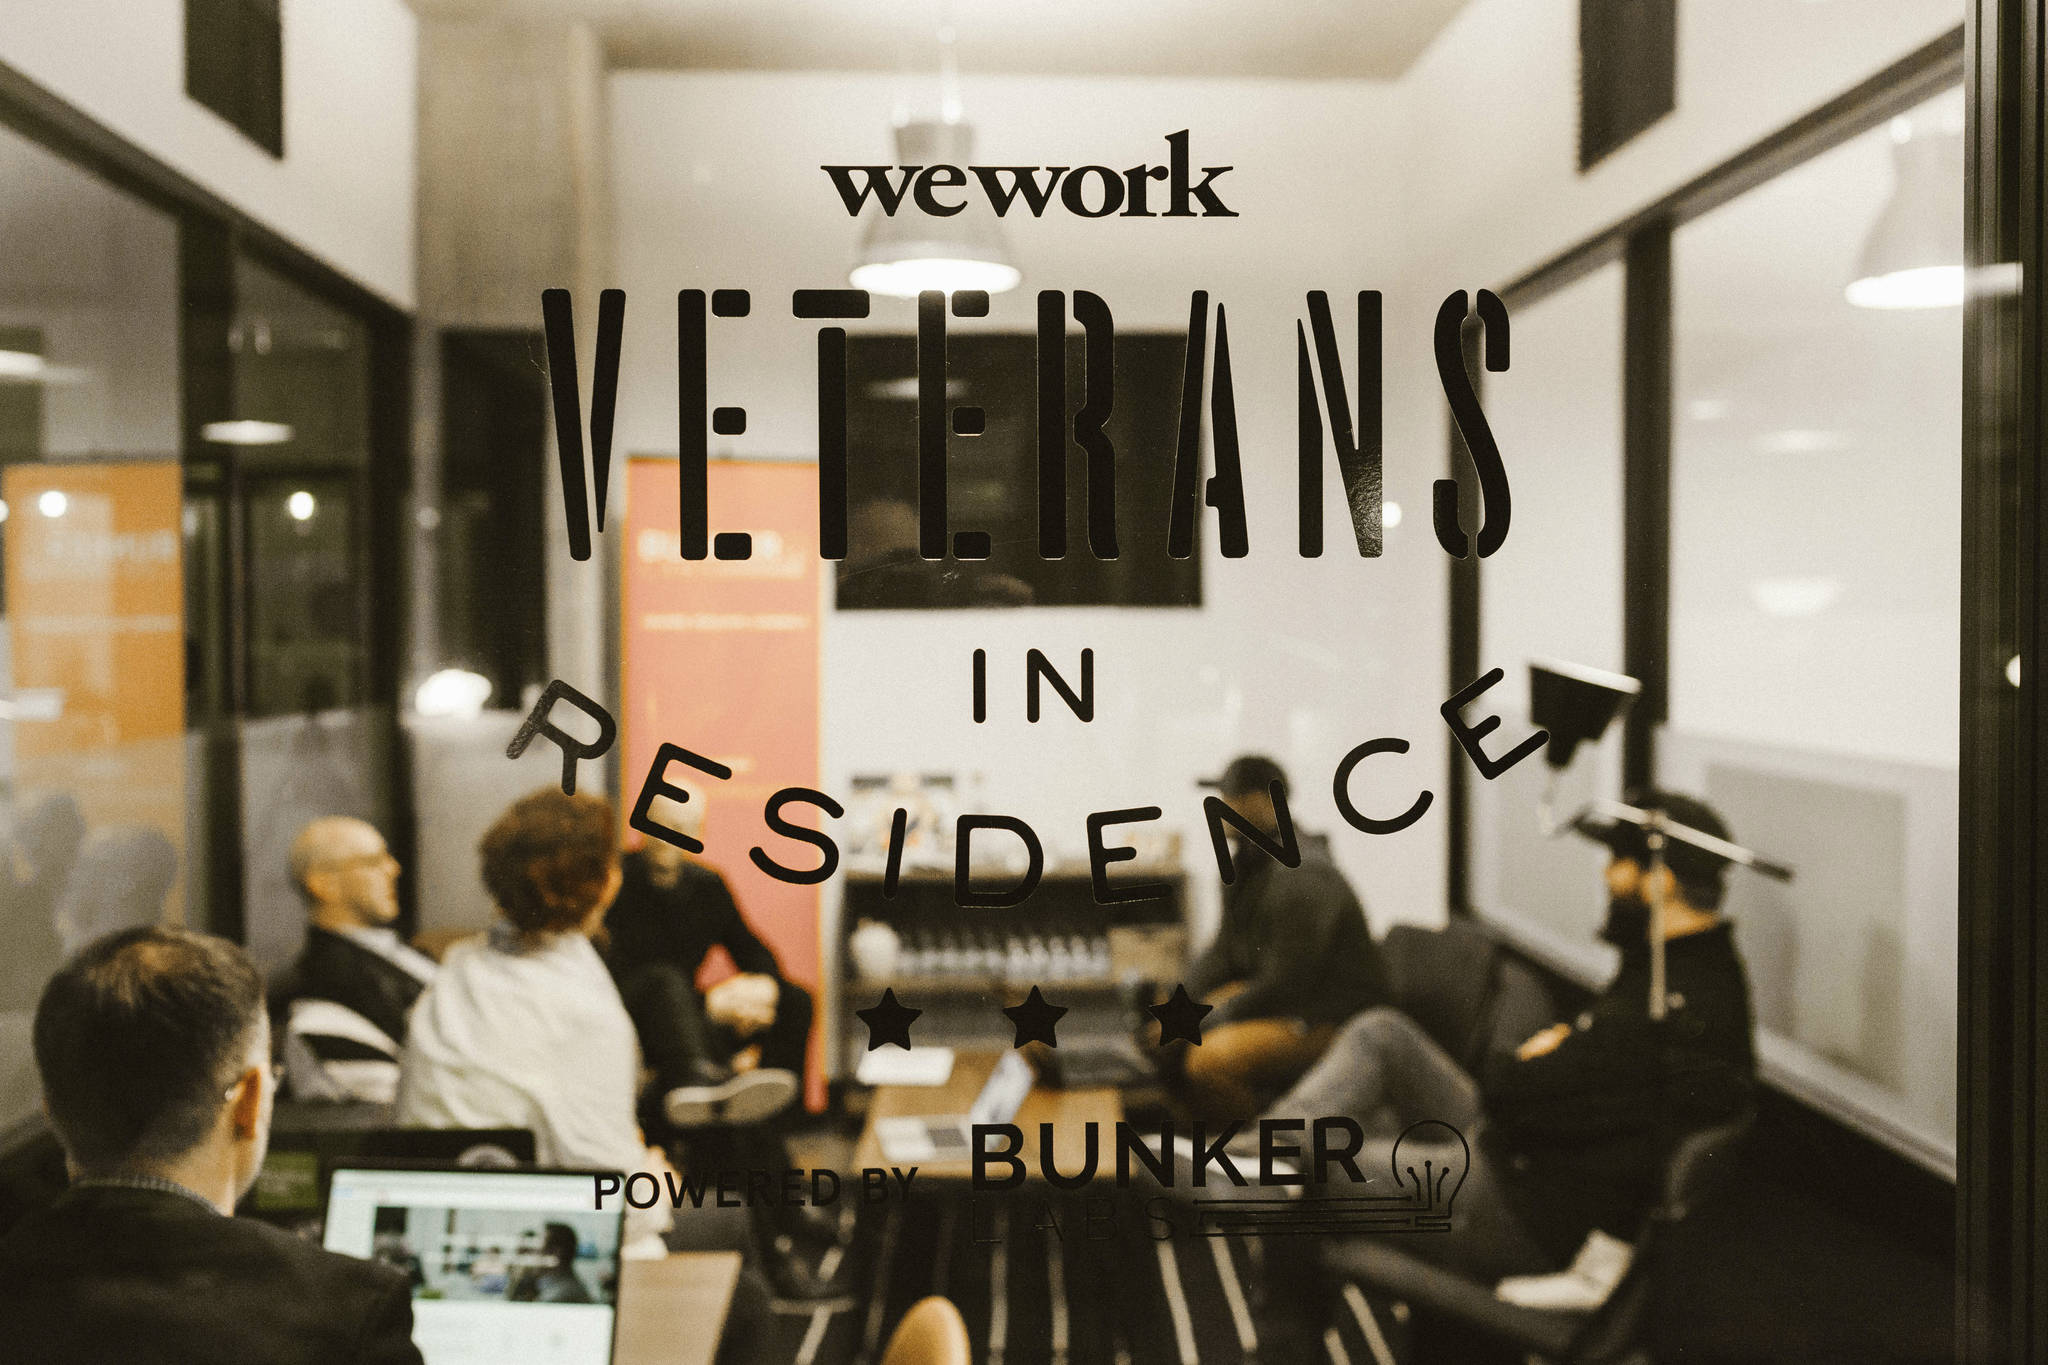 Seattle’s WeWork Veterans in Residence Program Powered by Bunker Labs started in January 2018. Photo courtesy WeWork